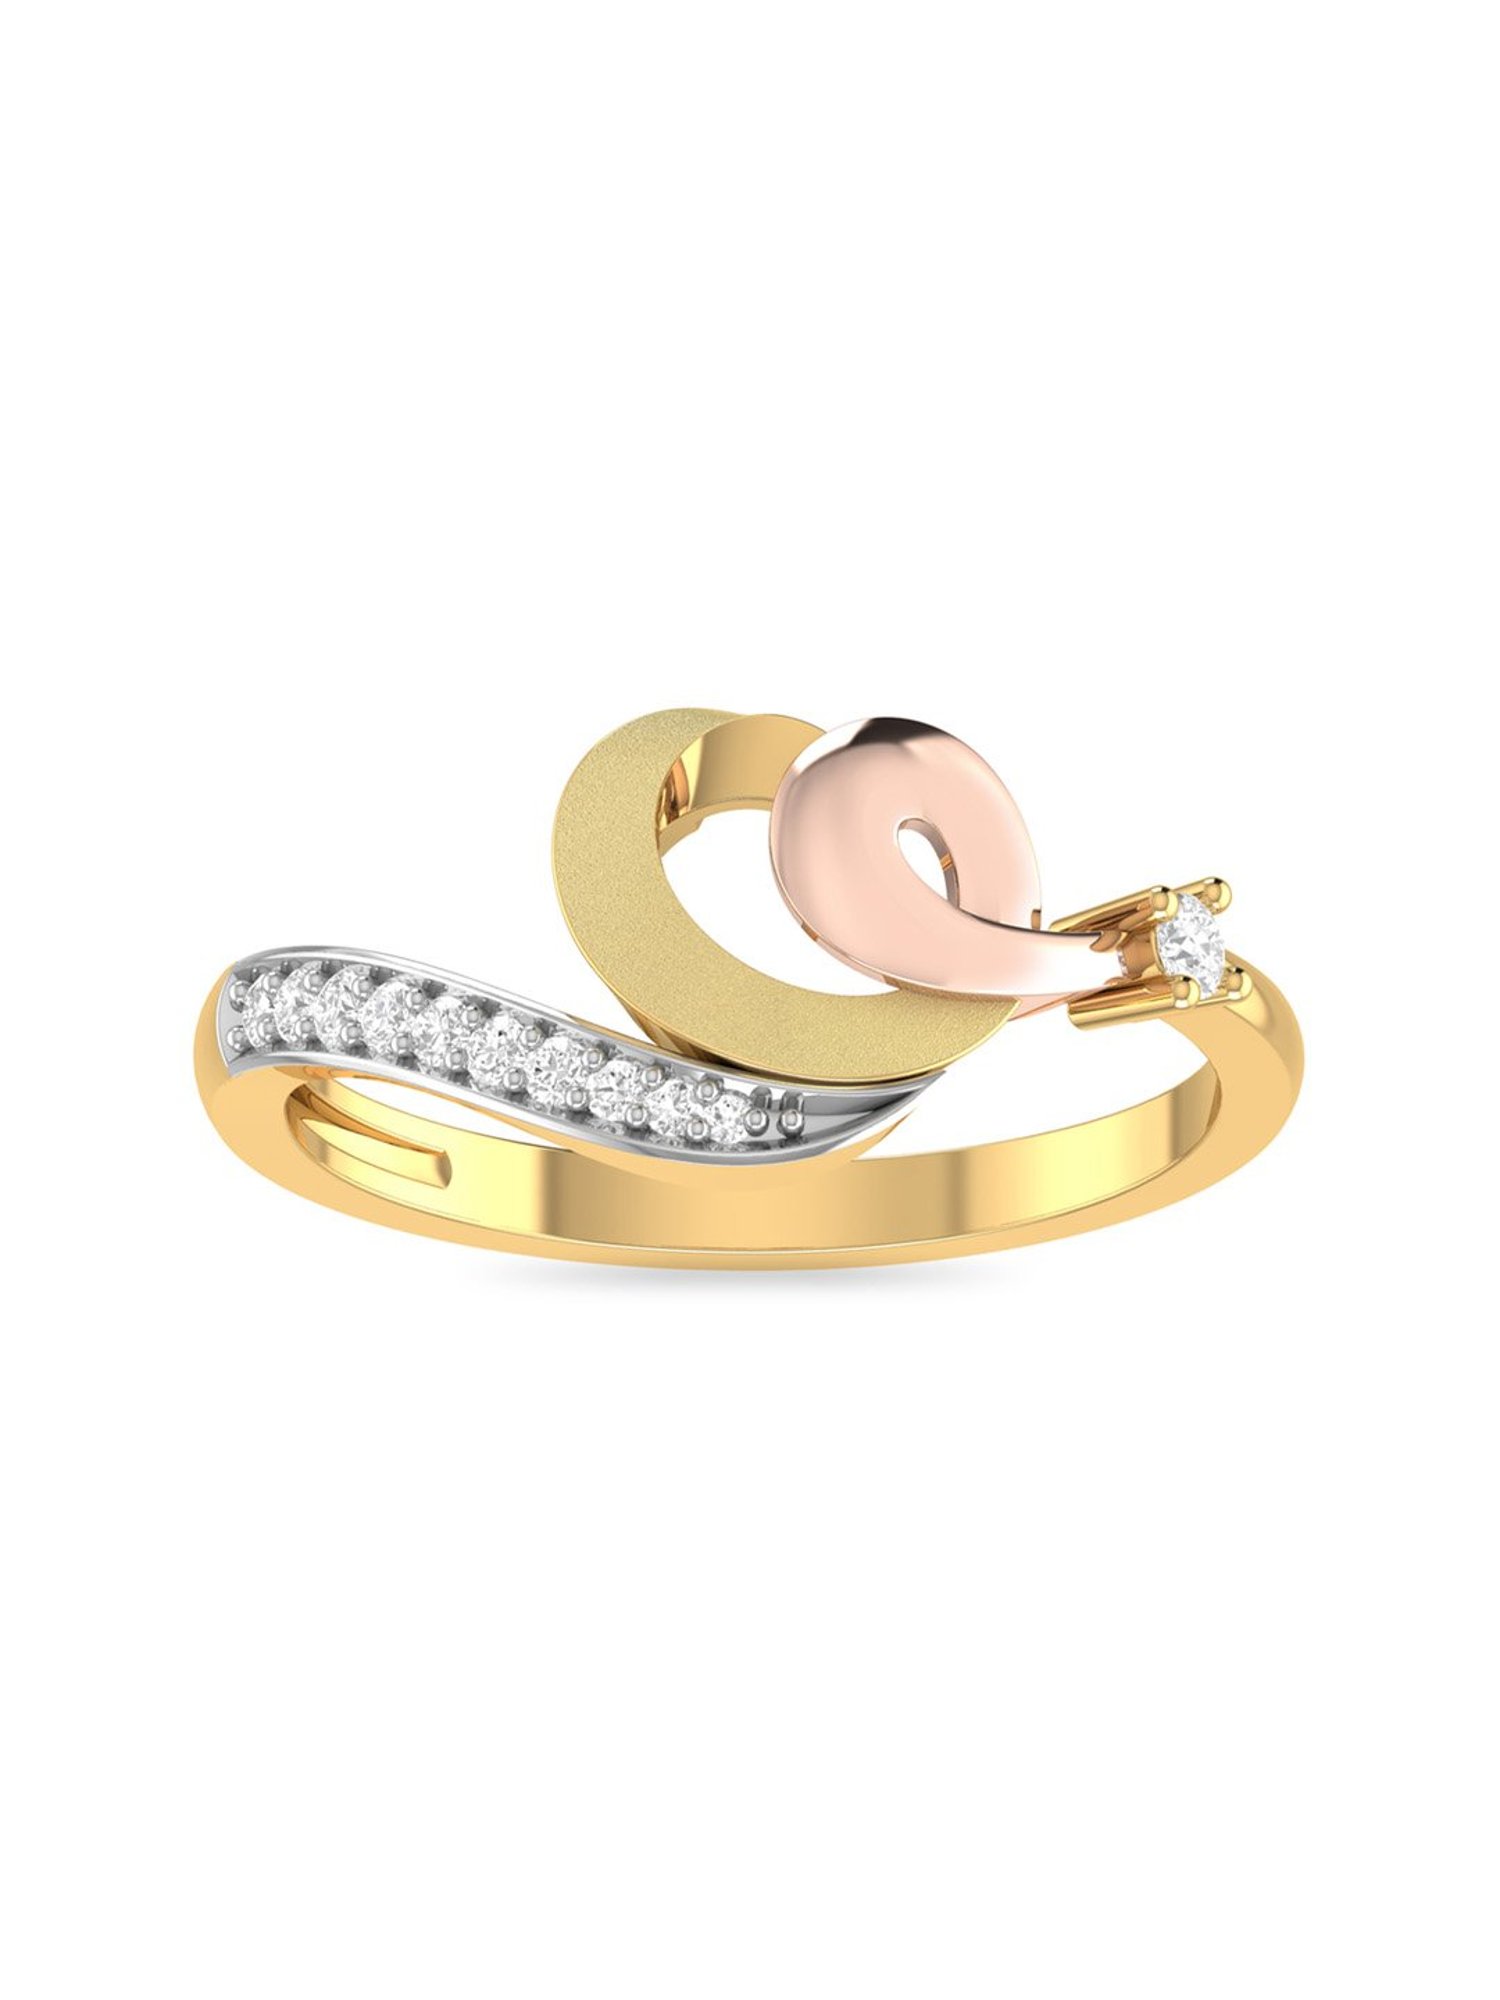 Buy Kanak Jewes Heart Shaped Brass G Alphabet Rings Gold Adjustable  Valentine American Diamond Love Initial Letter for Women Girls Girlfriend  Men Boys Couples I love you Cubic Zirconia Gold Plated Ring